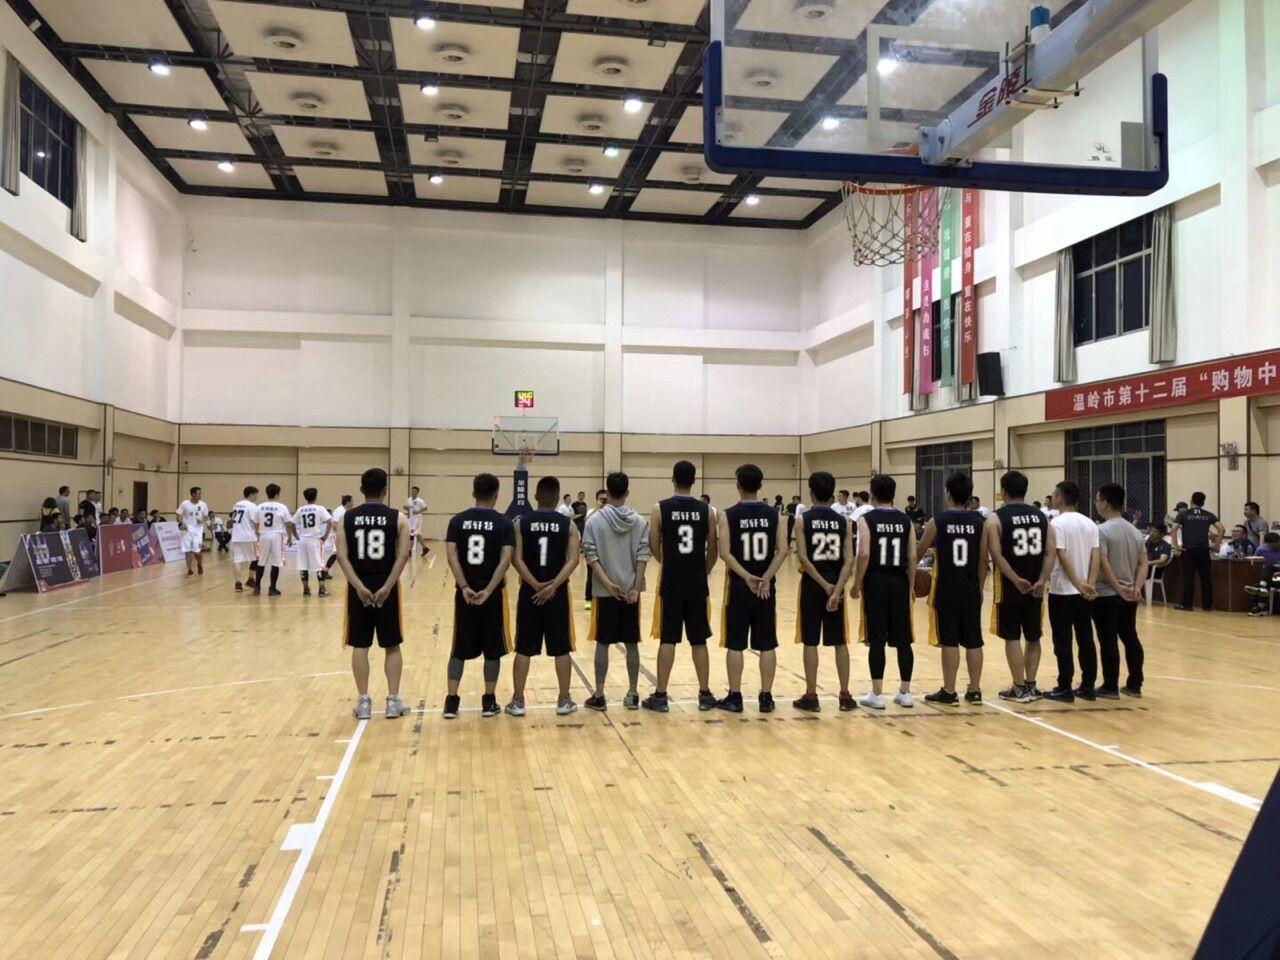 Our basketball team won in the basketball league match of Wenling